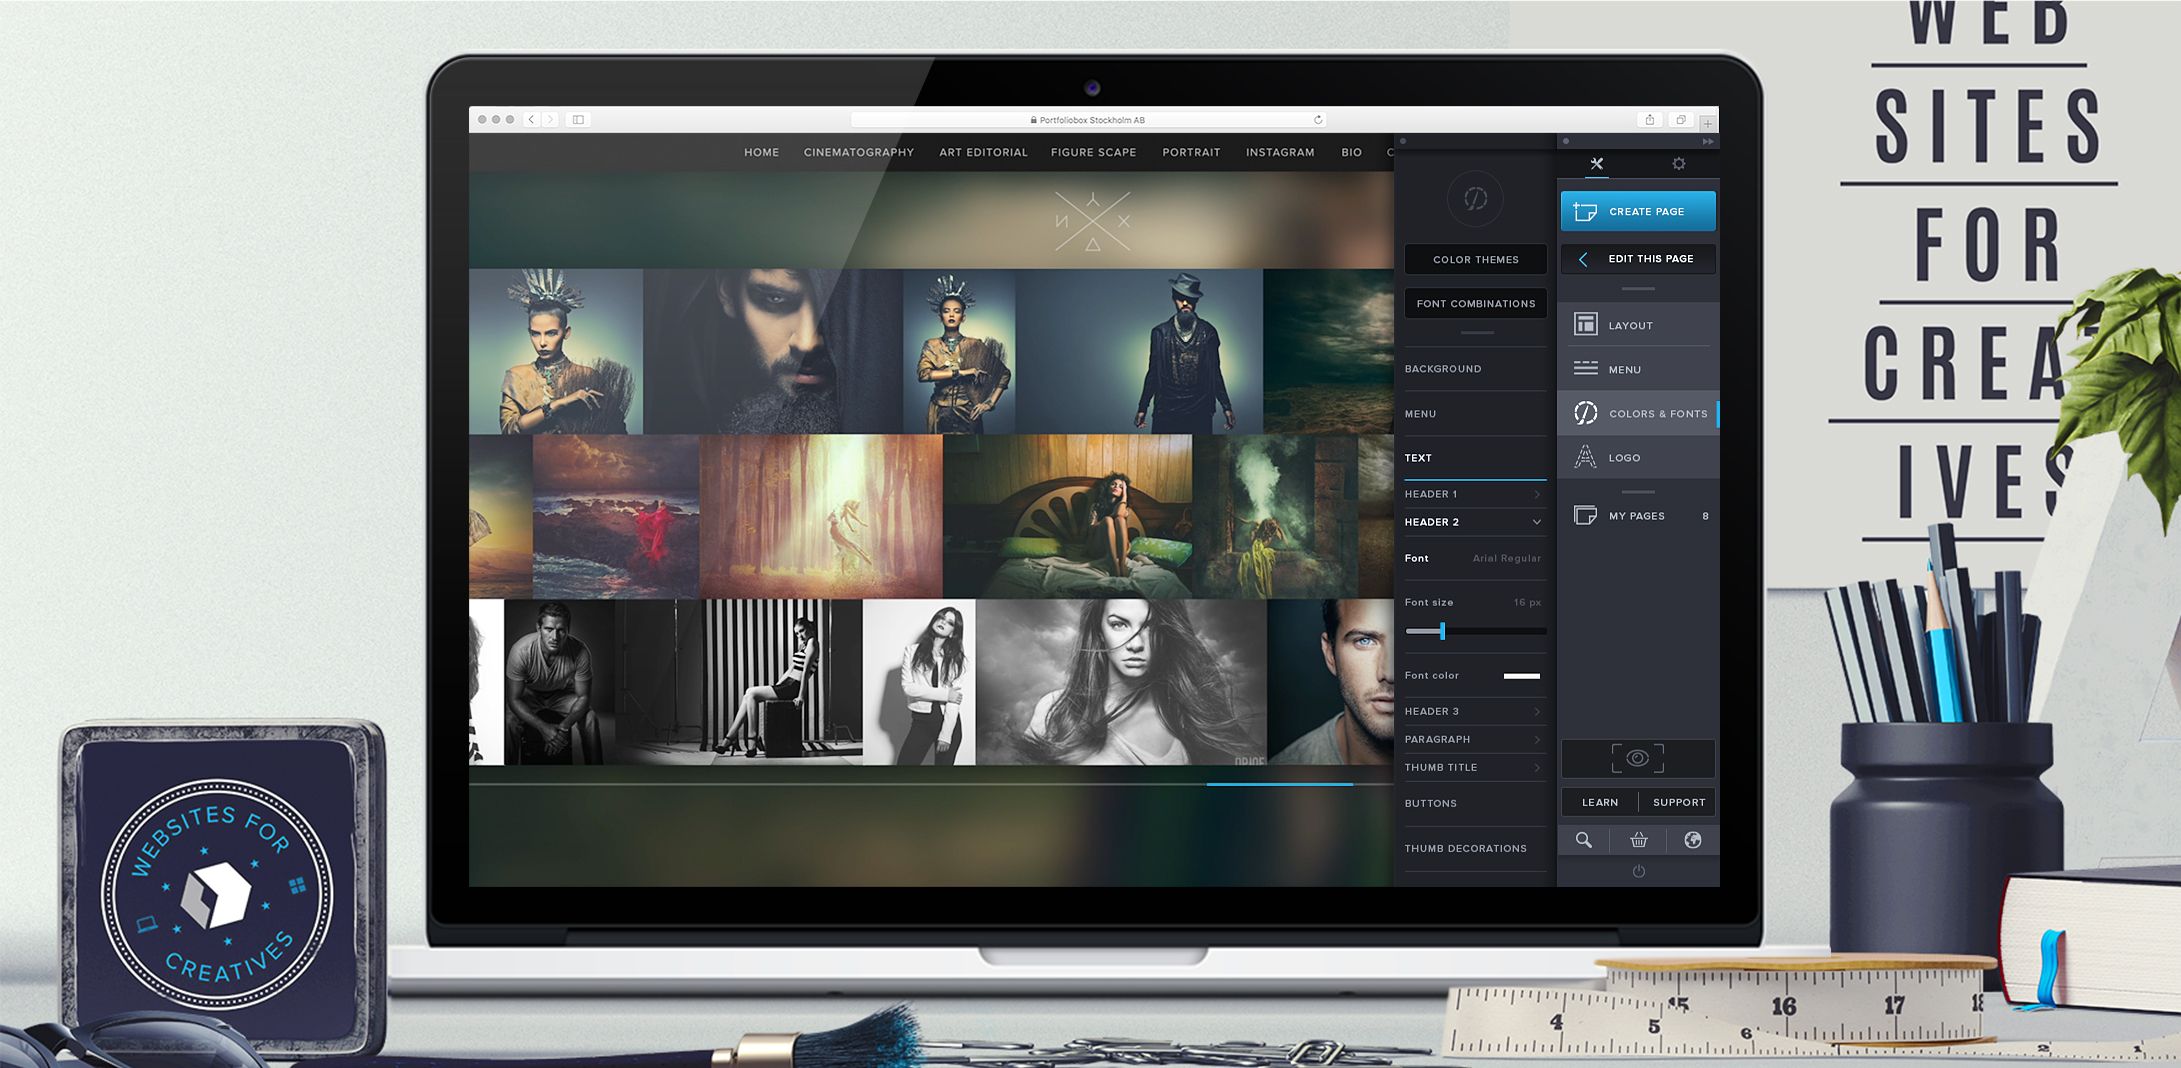 Portfoliobox website builder will now be free for students